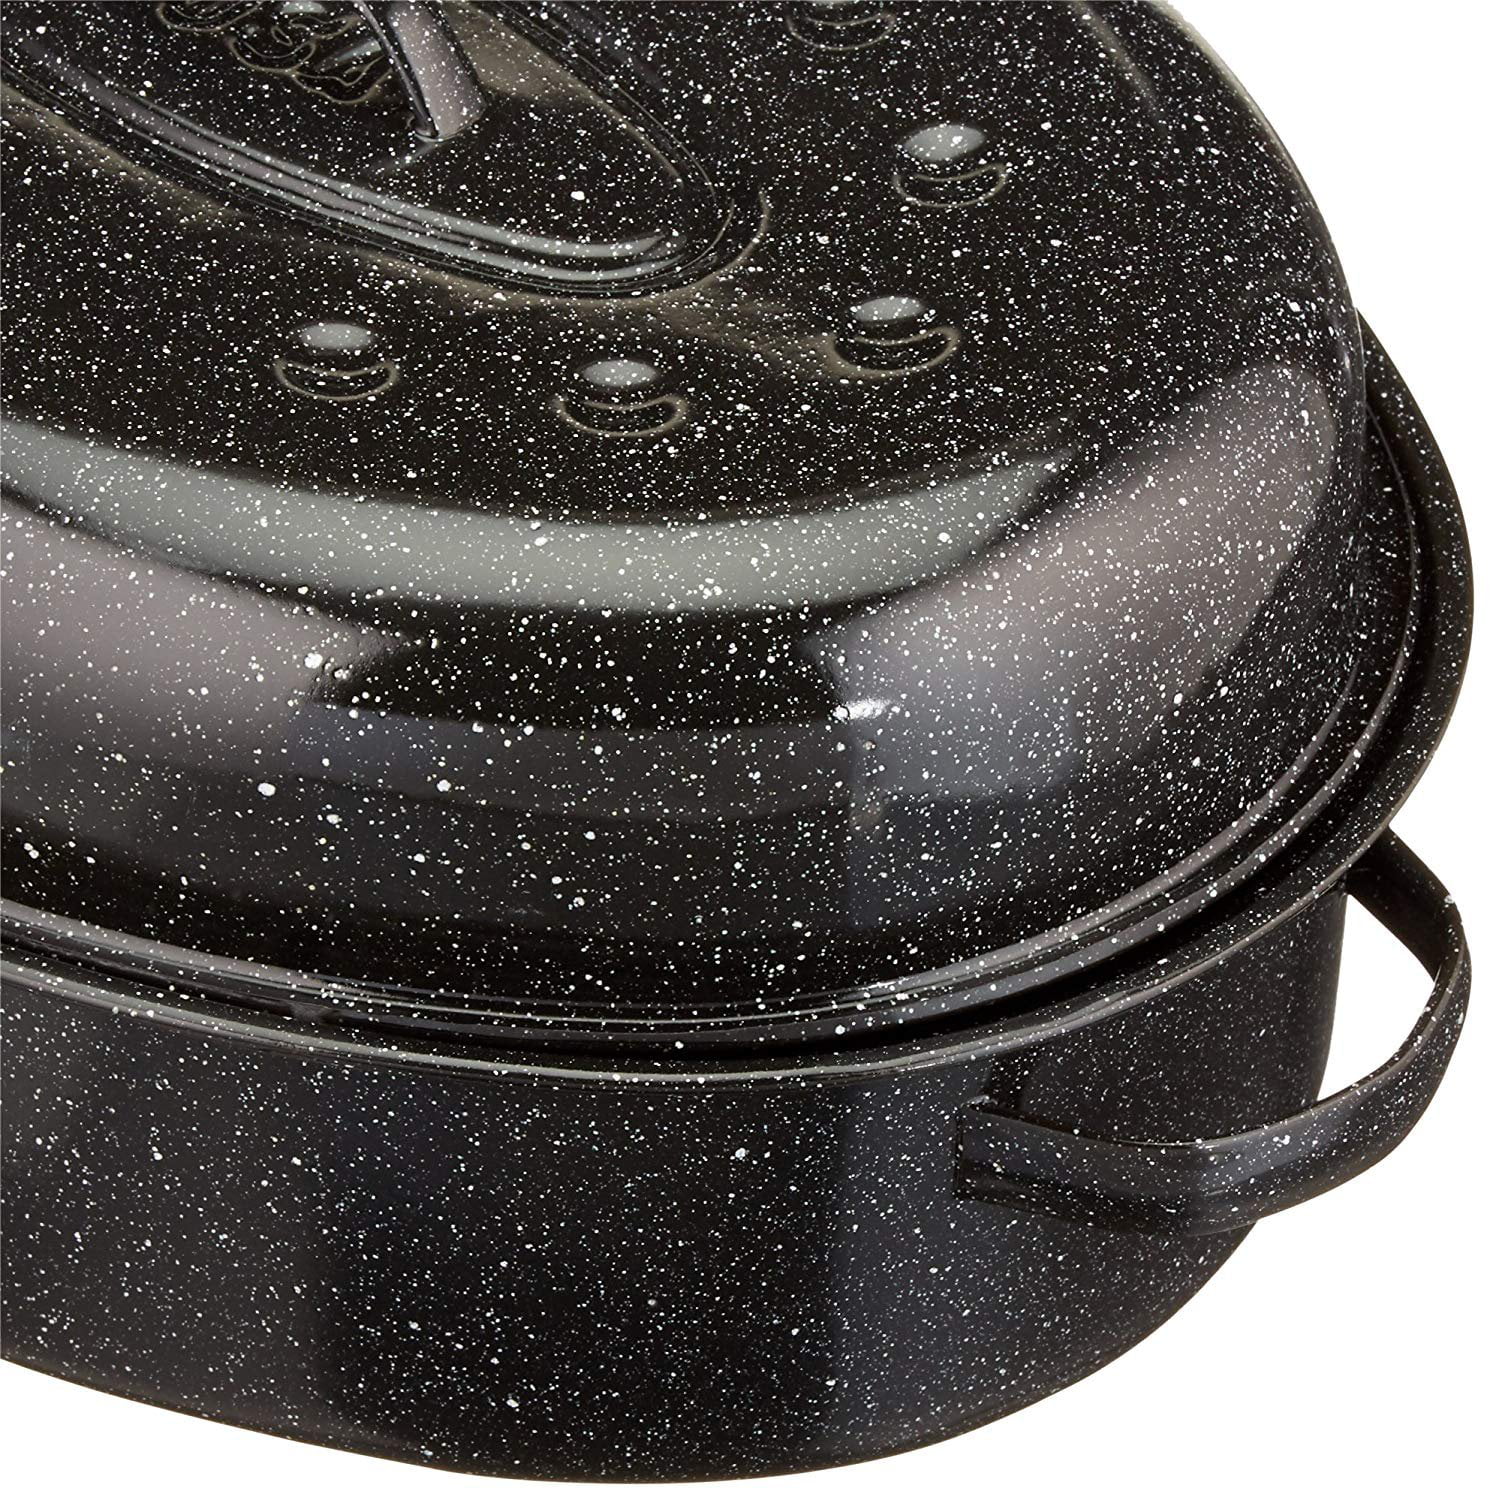 Details about   Granite Ware 18-Inch Covered Oval Roaster 